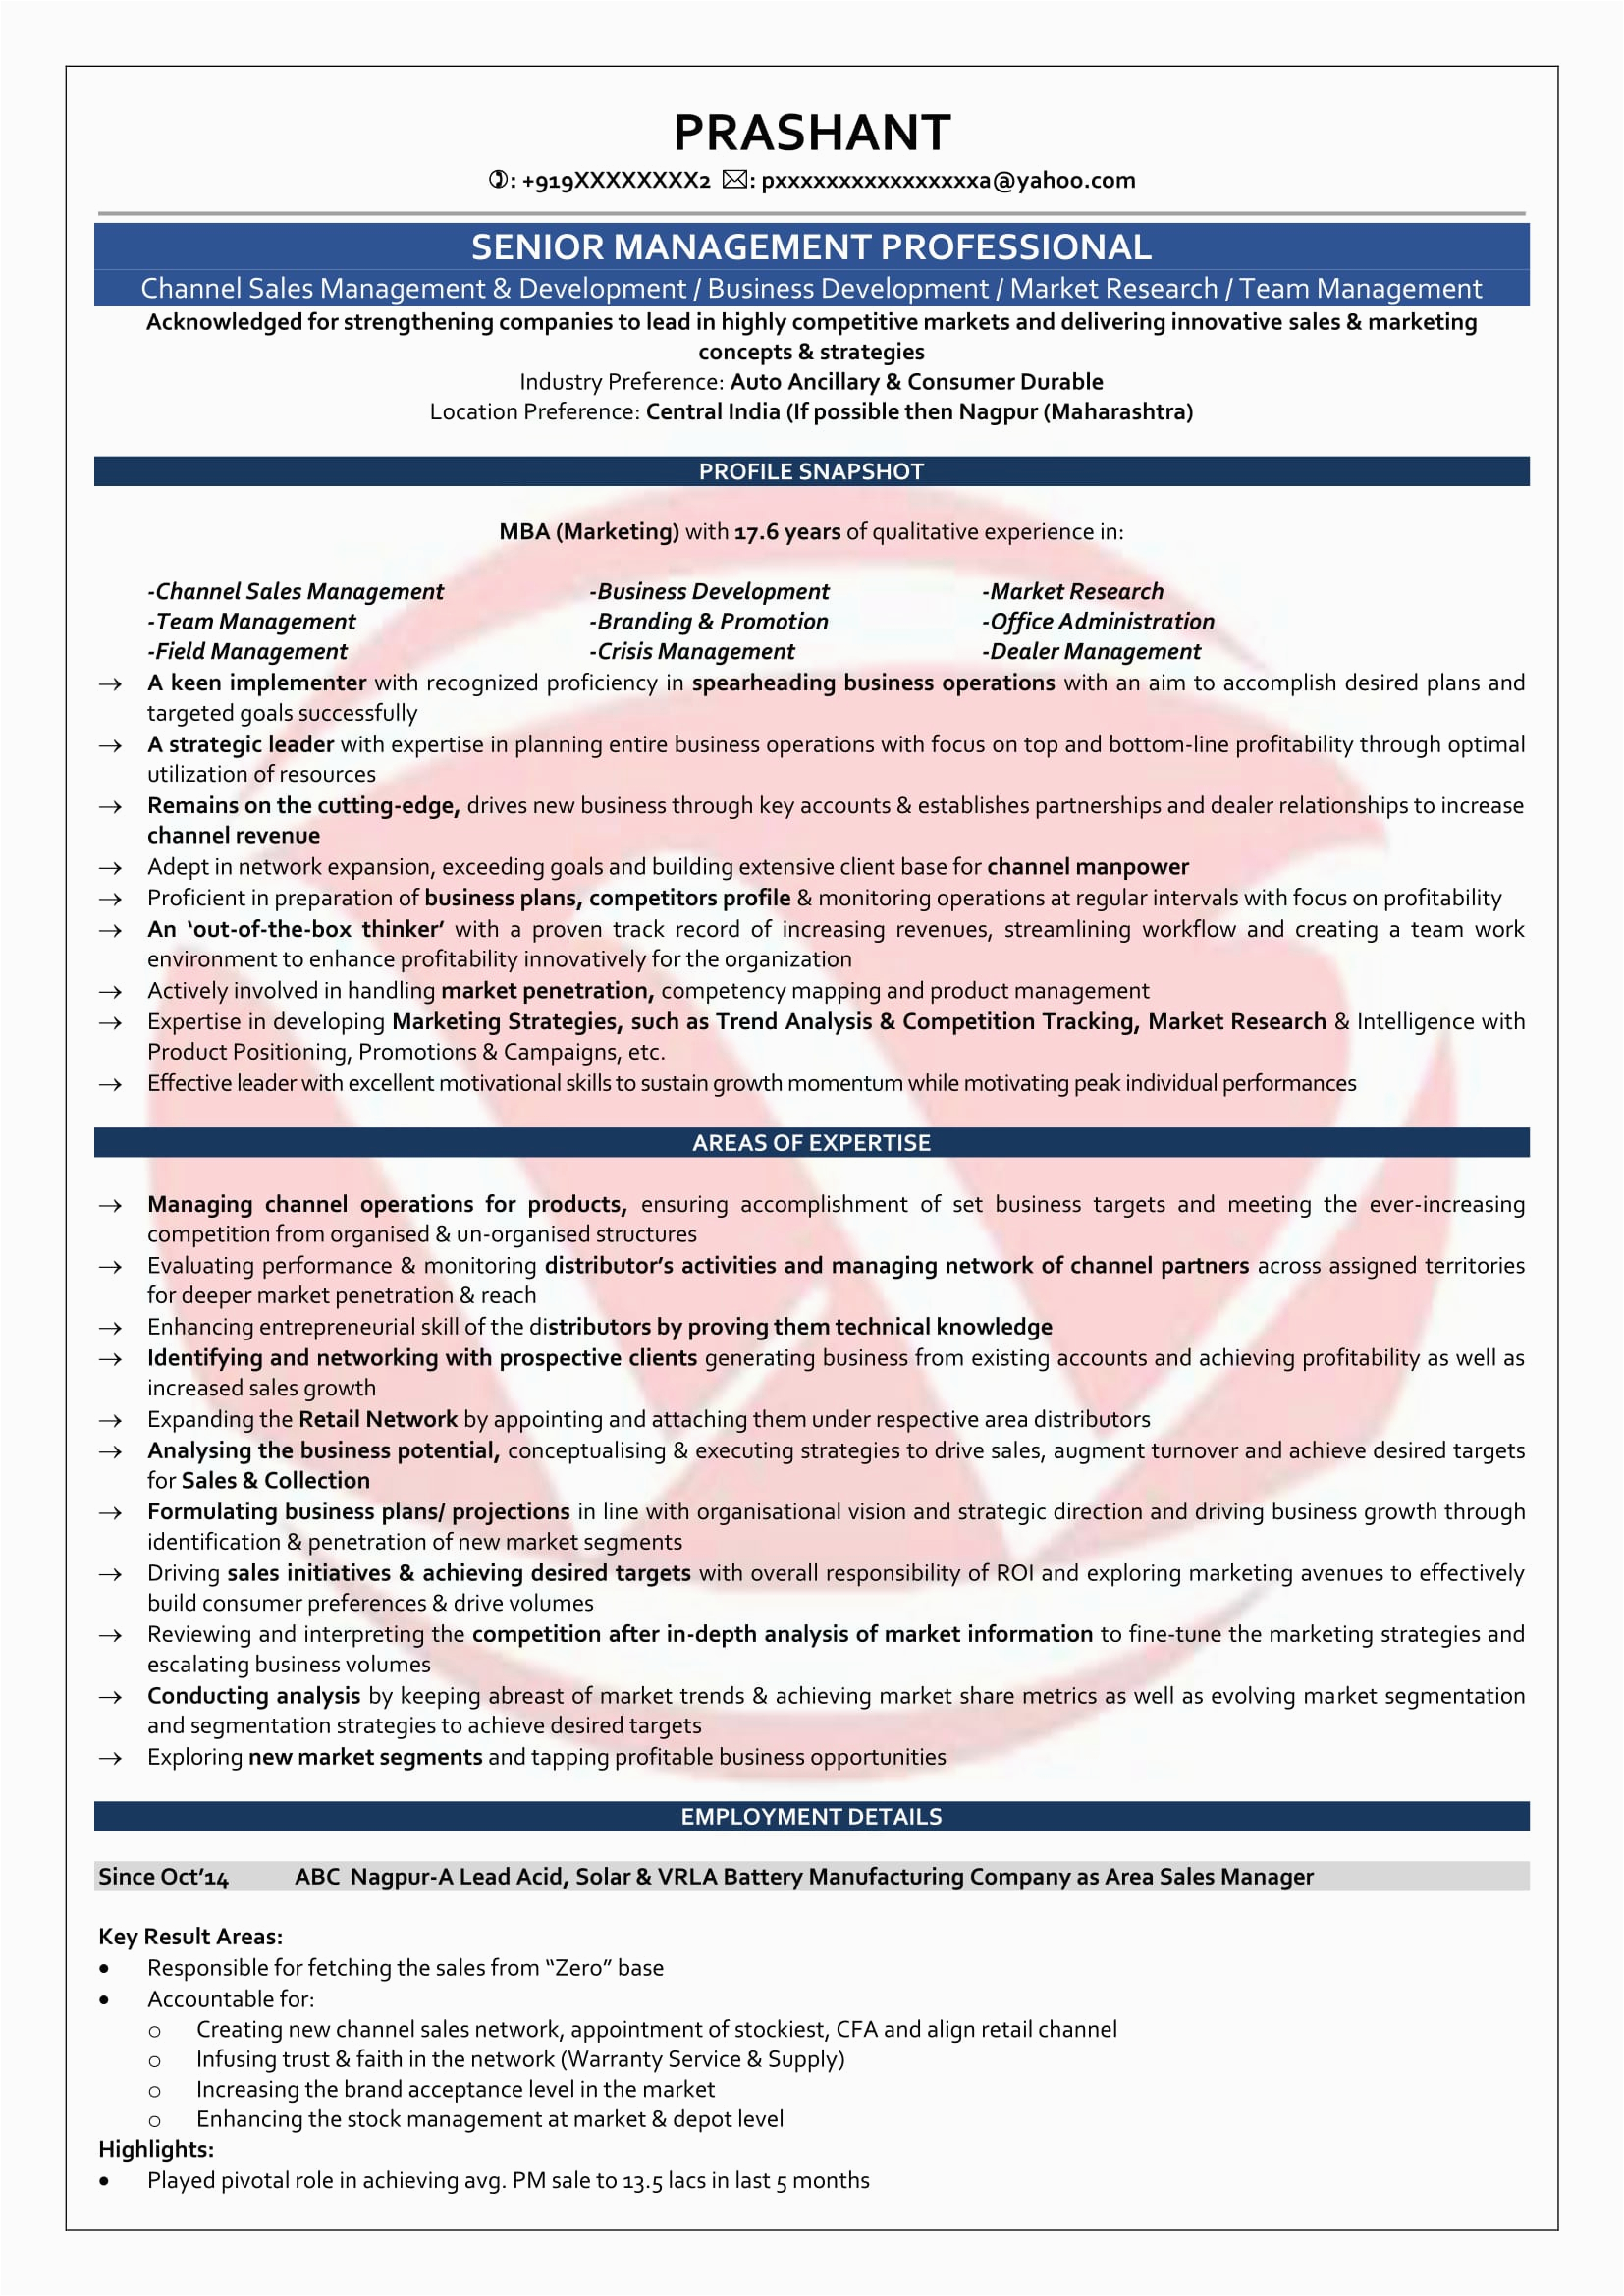 Sales and Marketing Resume Sample India Resume for Sales and Marketing In India Marketing Resume Example